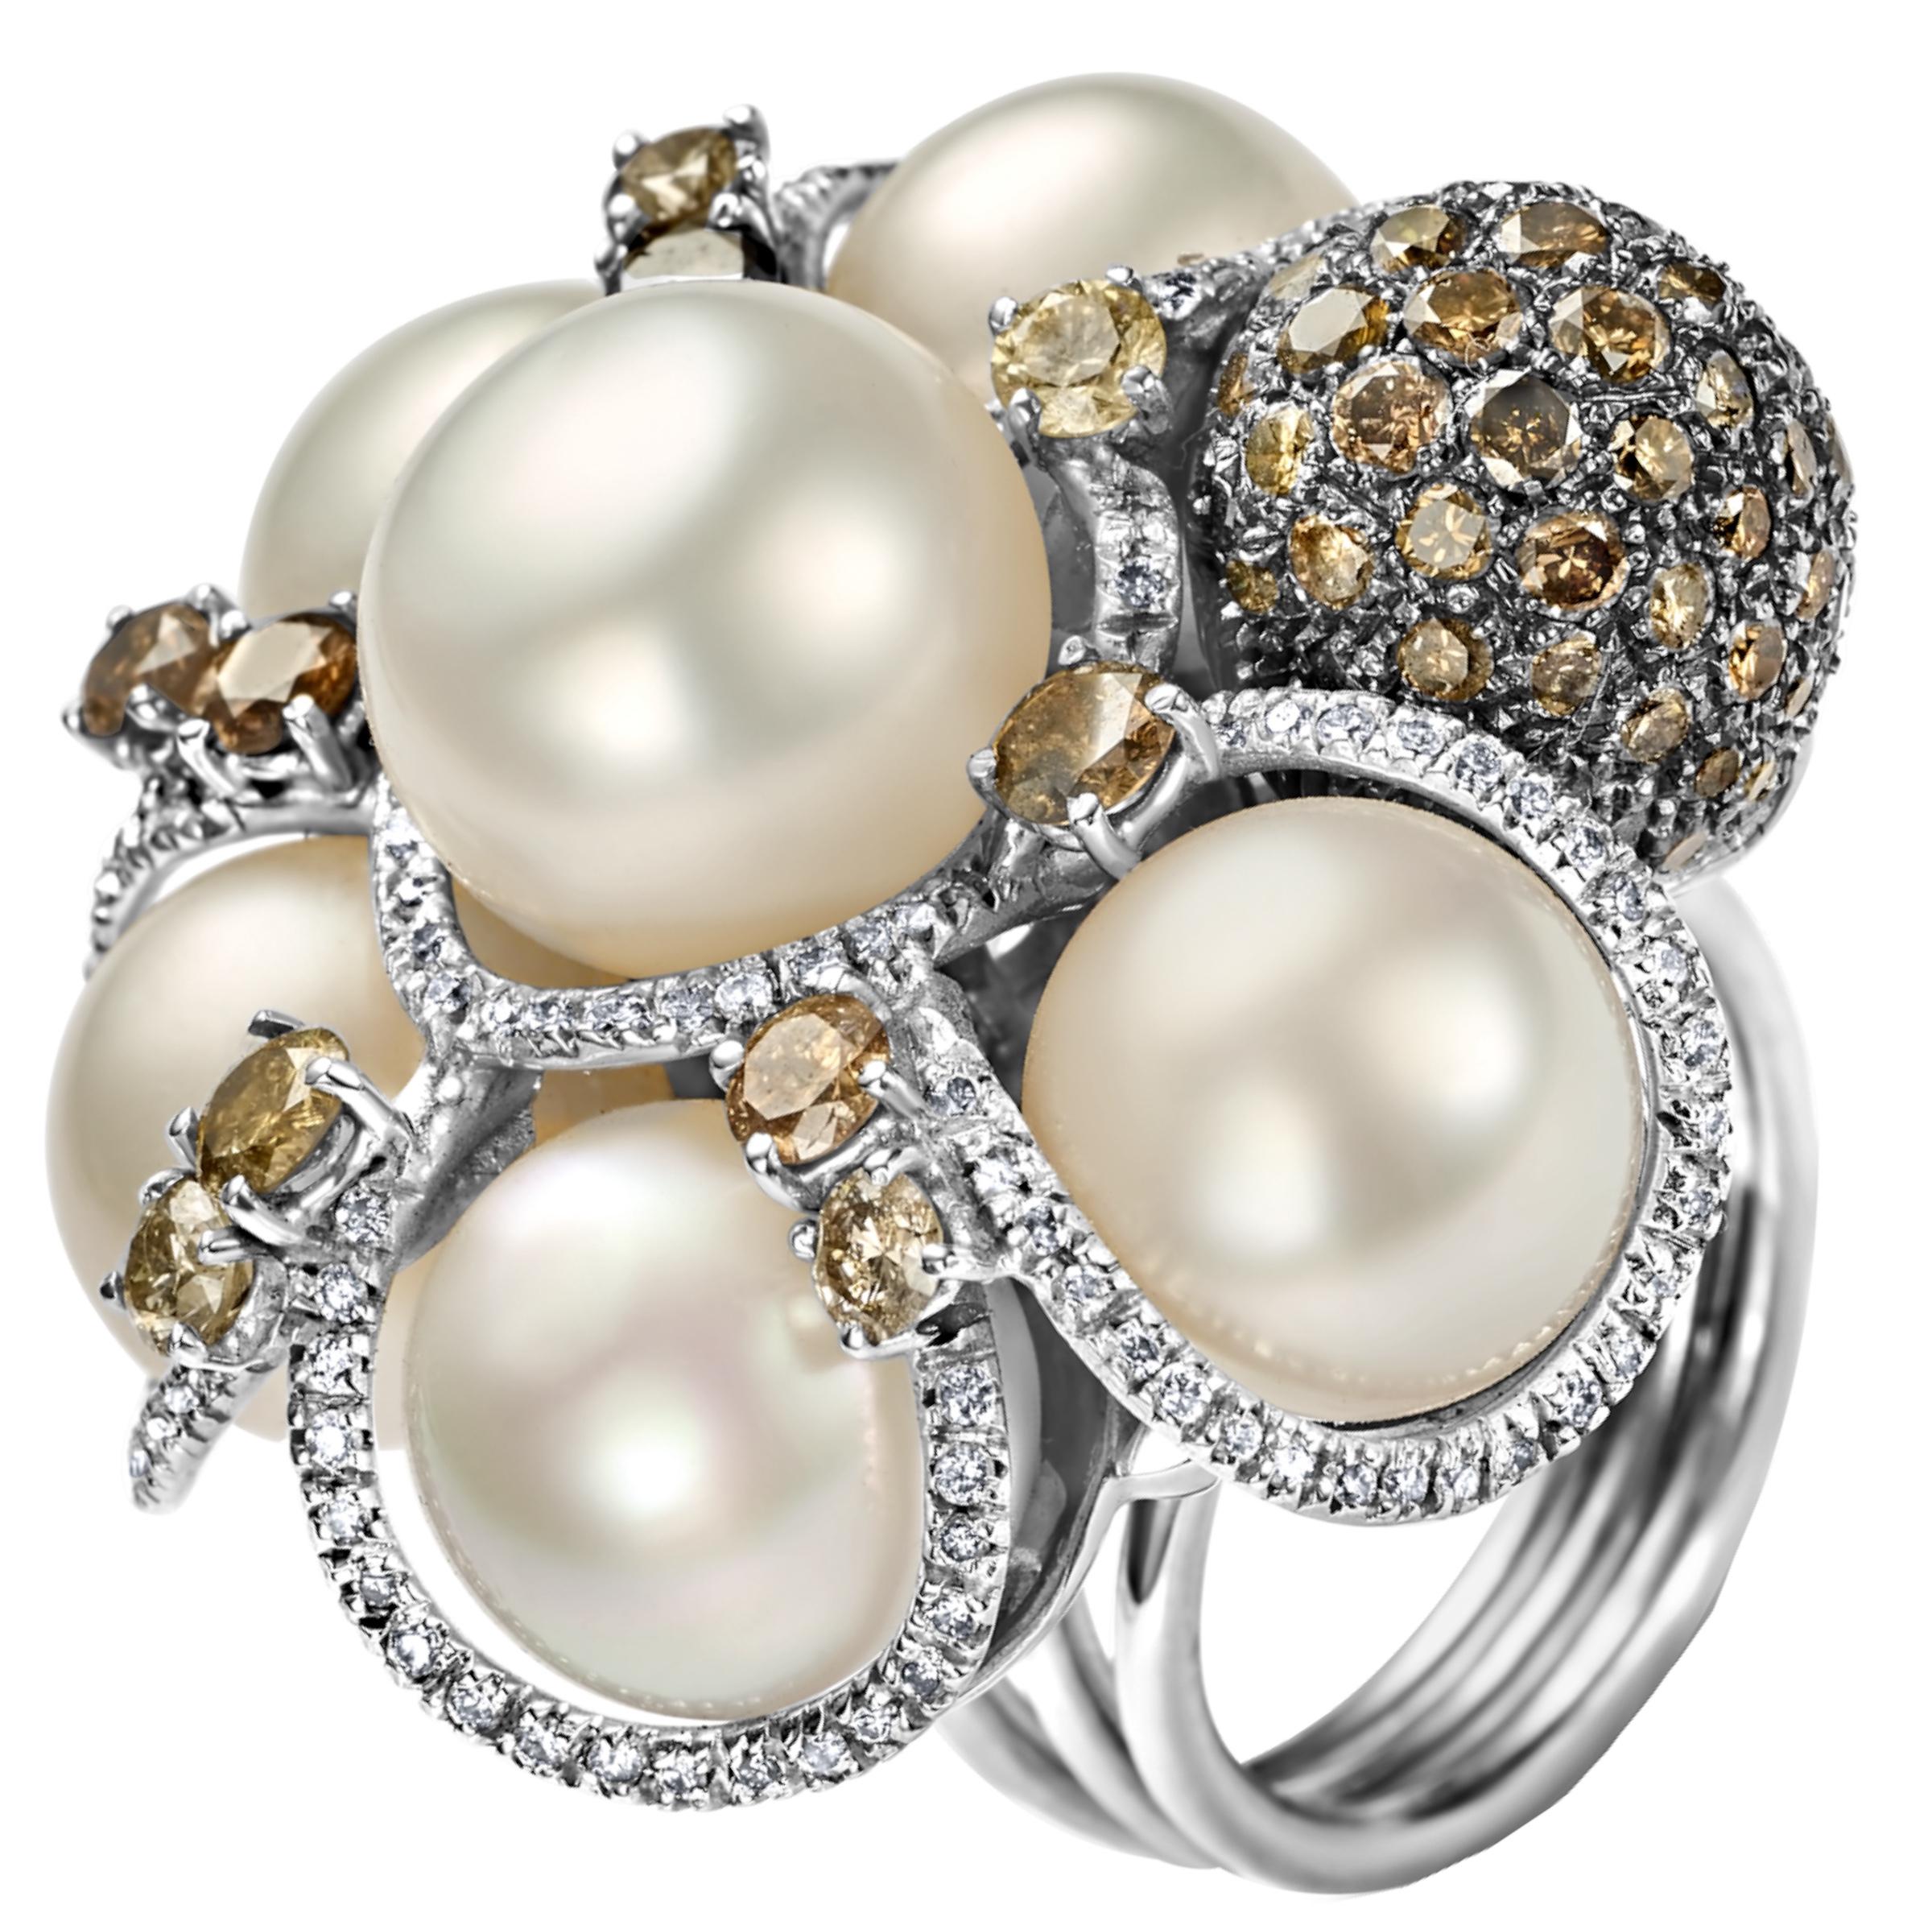 Artisan 18kt White Gold Ring with 3.65ct Diamonds& Pearls, Can Purchase with Bracelet For Sale